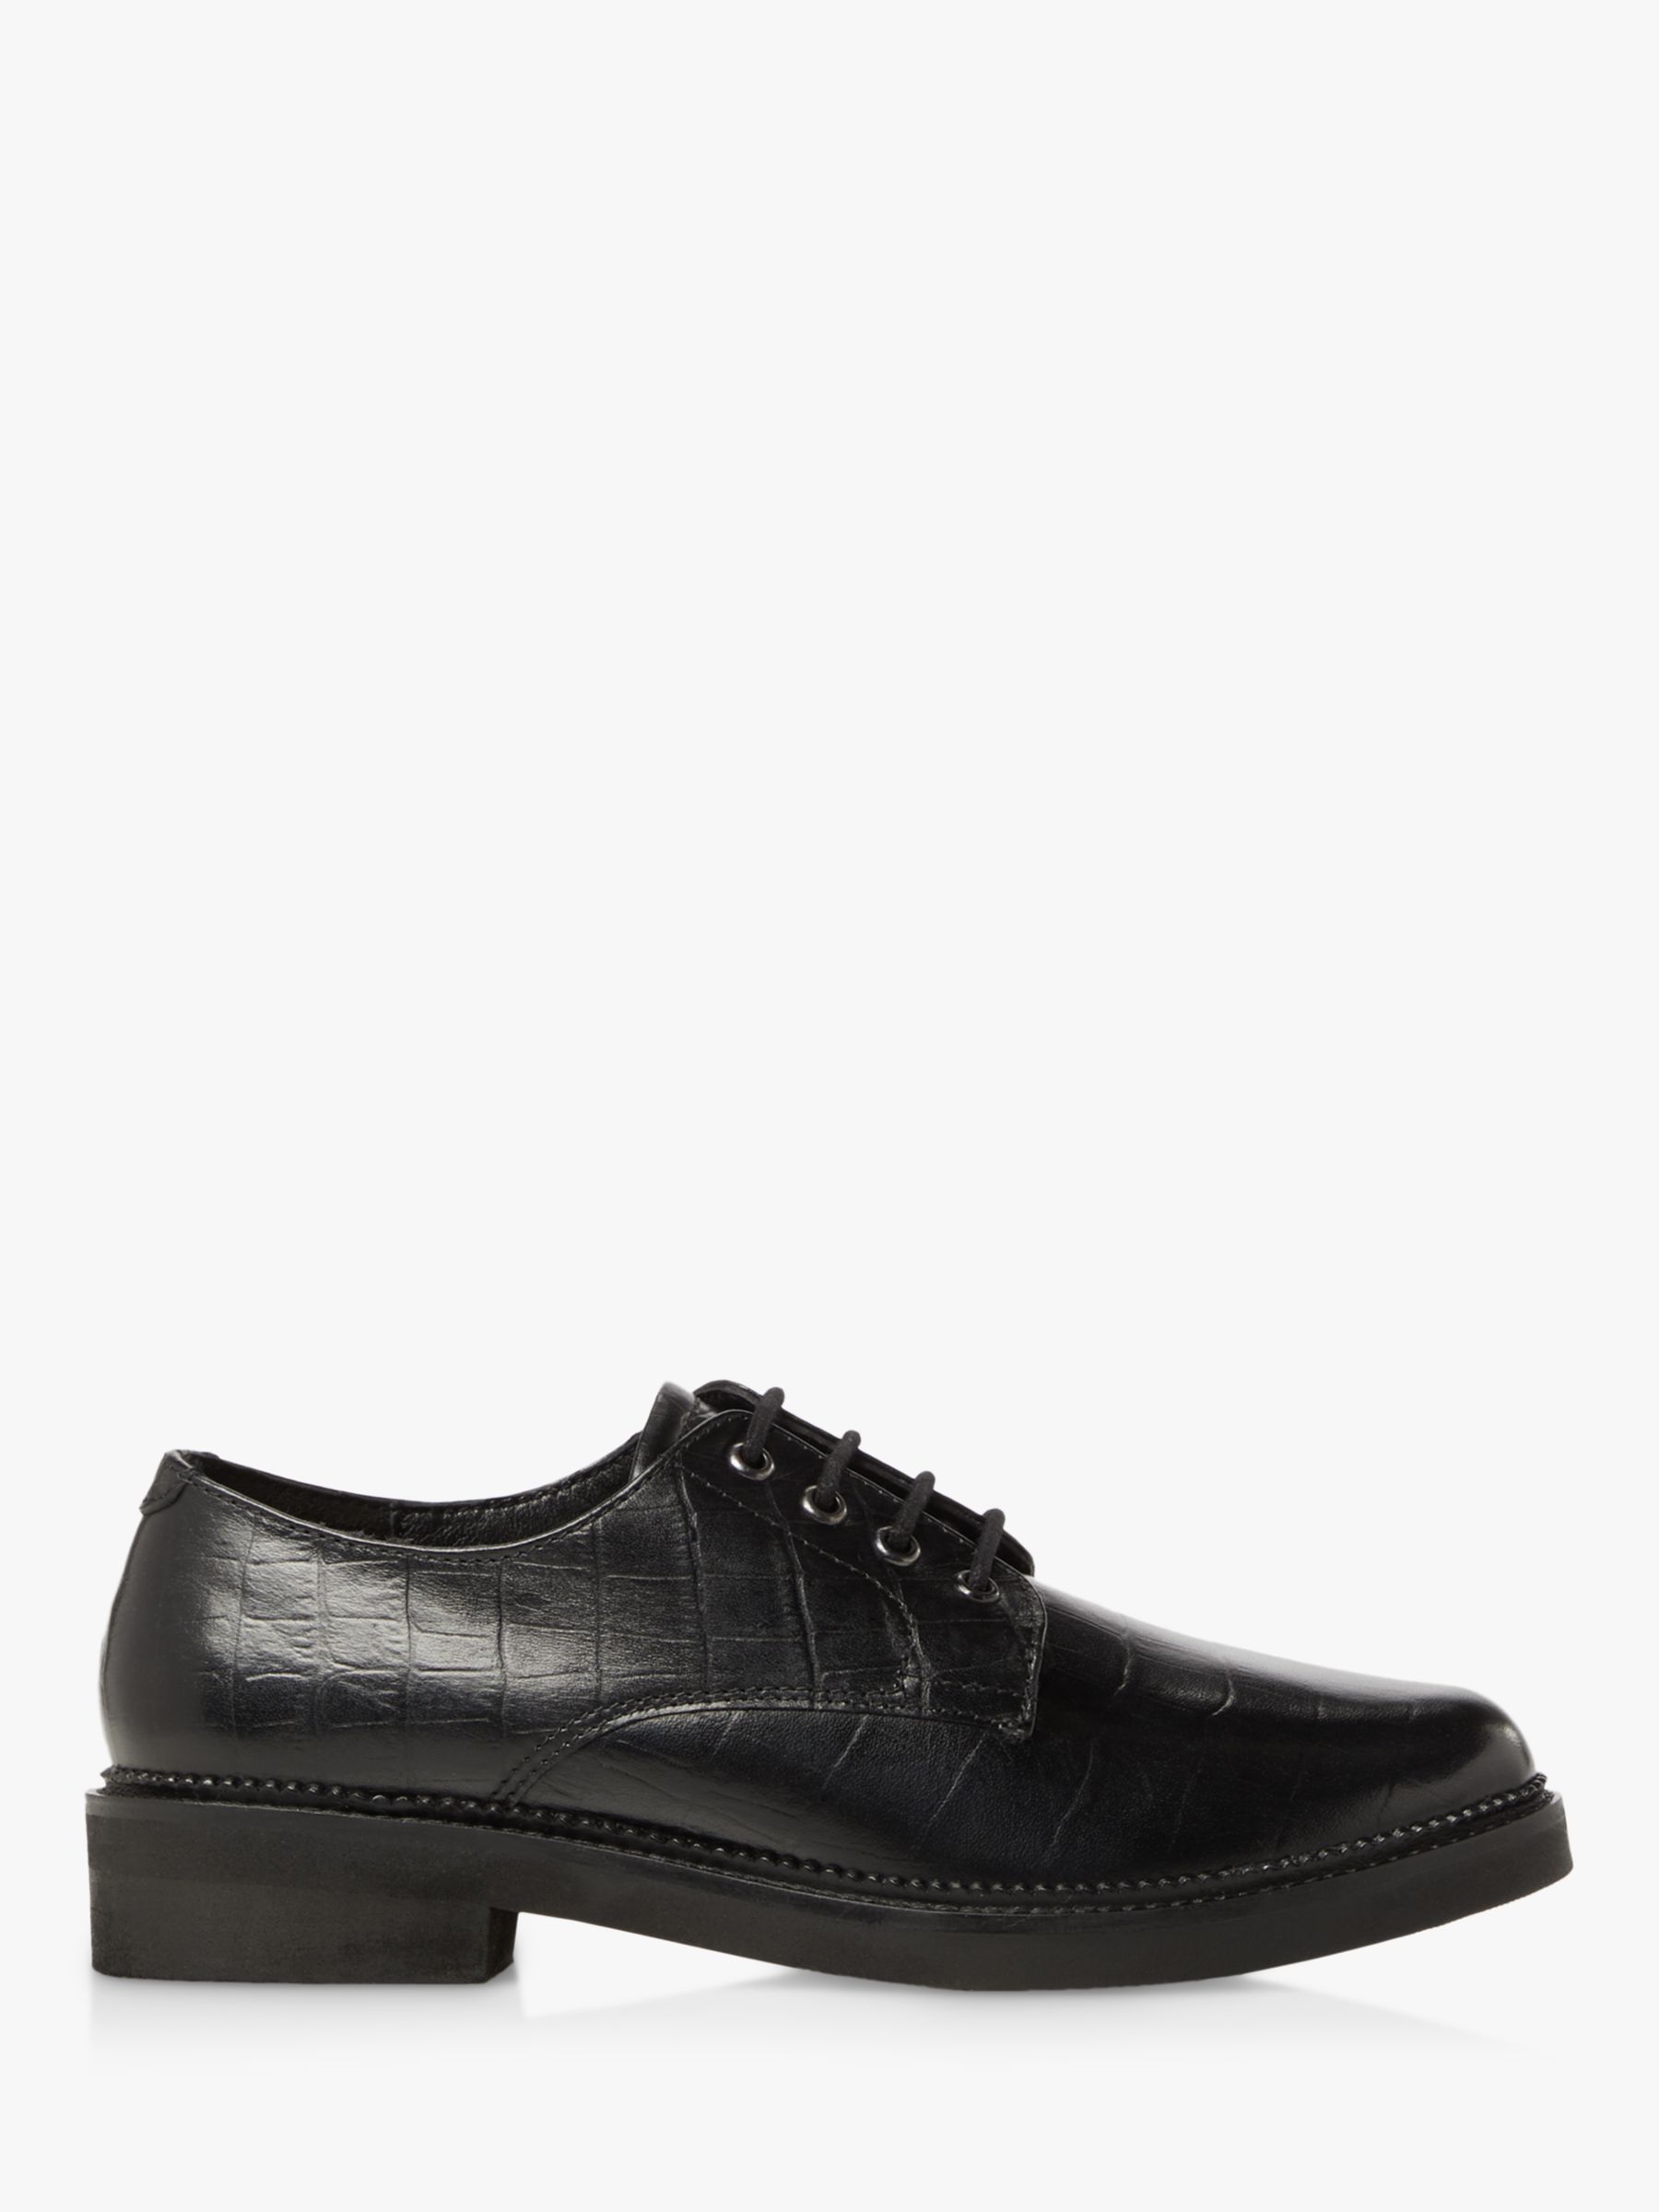 Bertie Fill Leather Lace Up Brogues, Black